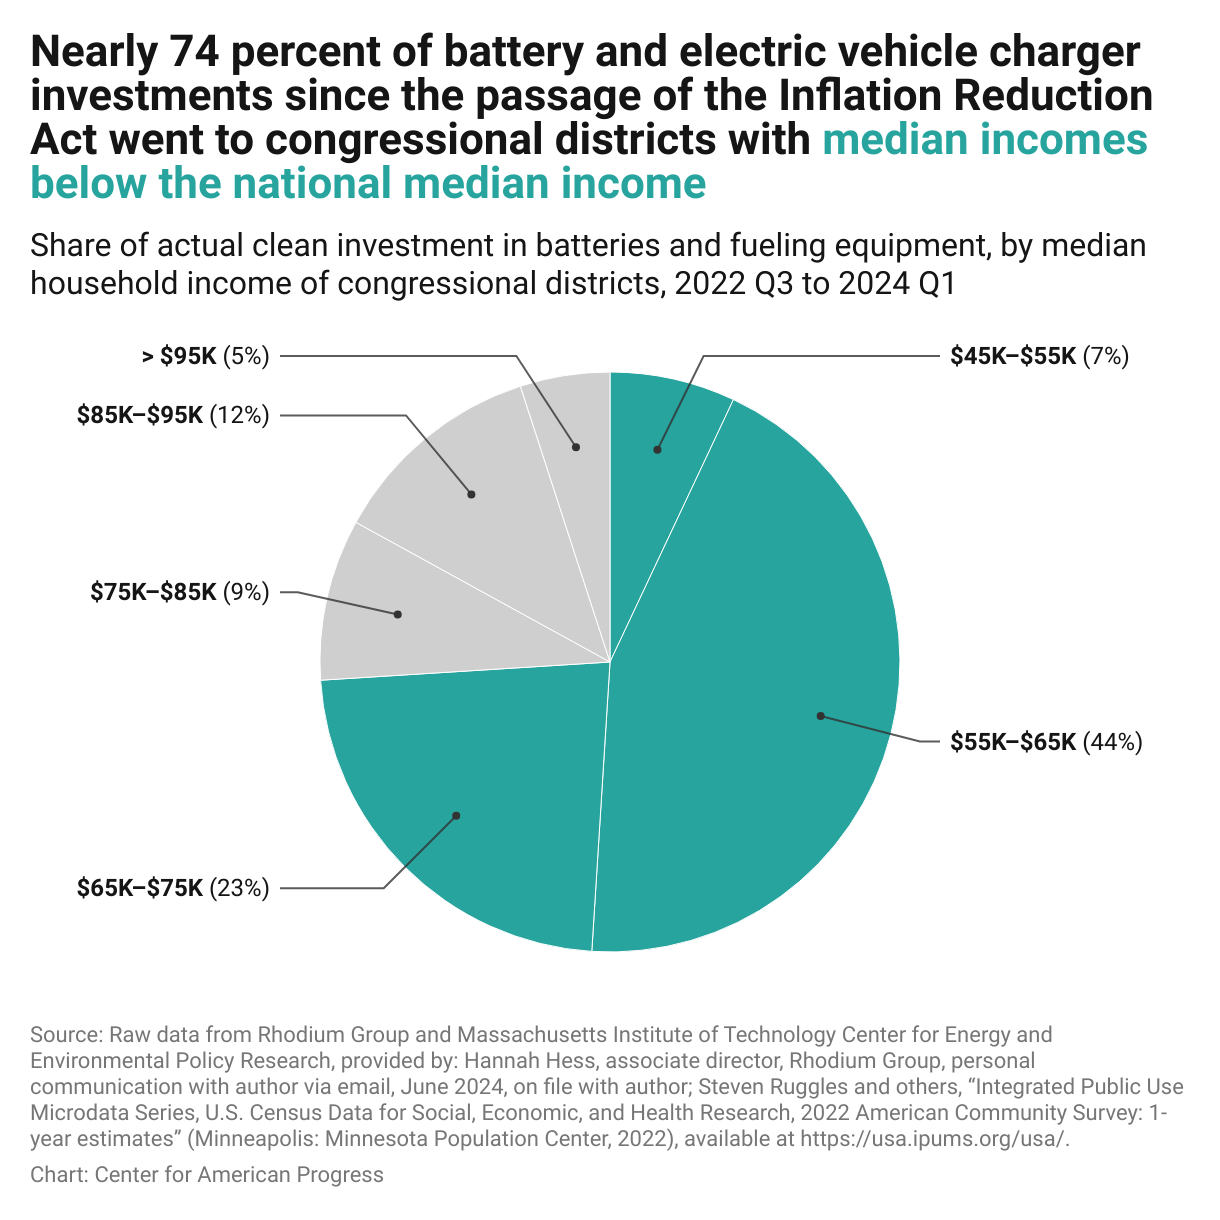 Pie chart that shows share of battery and electric vehicle charger investment in congressional districts by range of median household income, with the greatest share of investment, at 76 percent, occurring in districts with median household incomes below the national average.